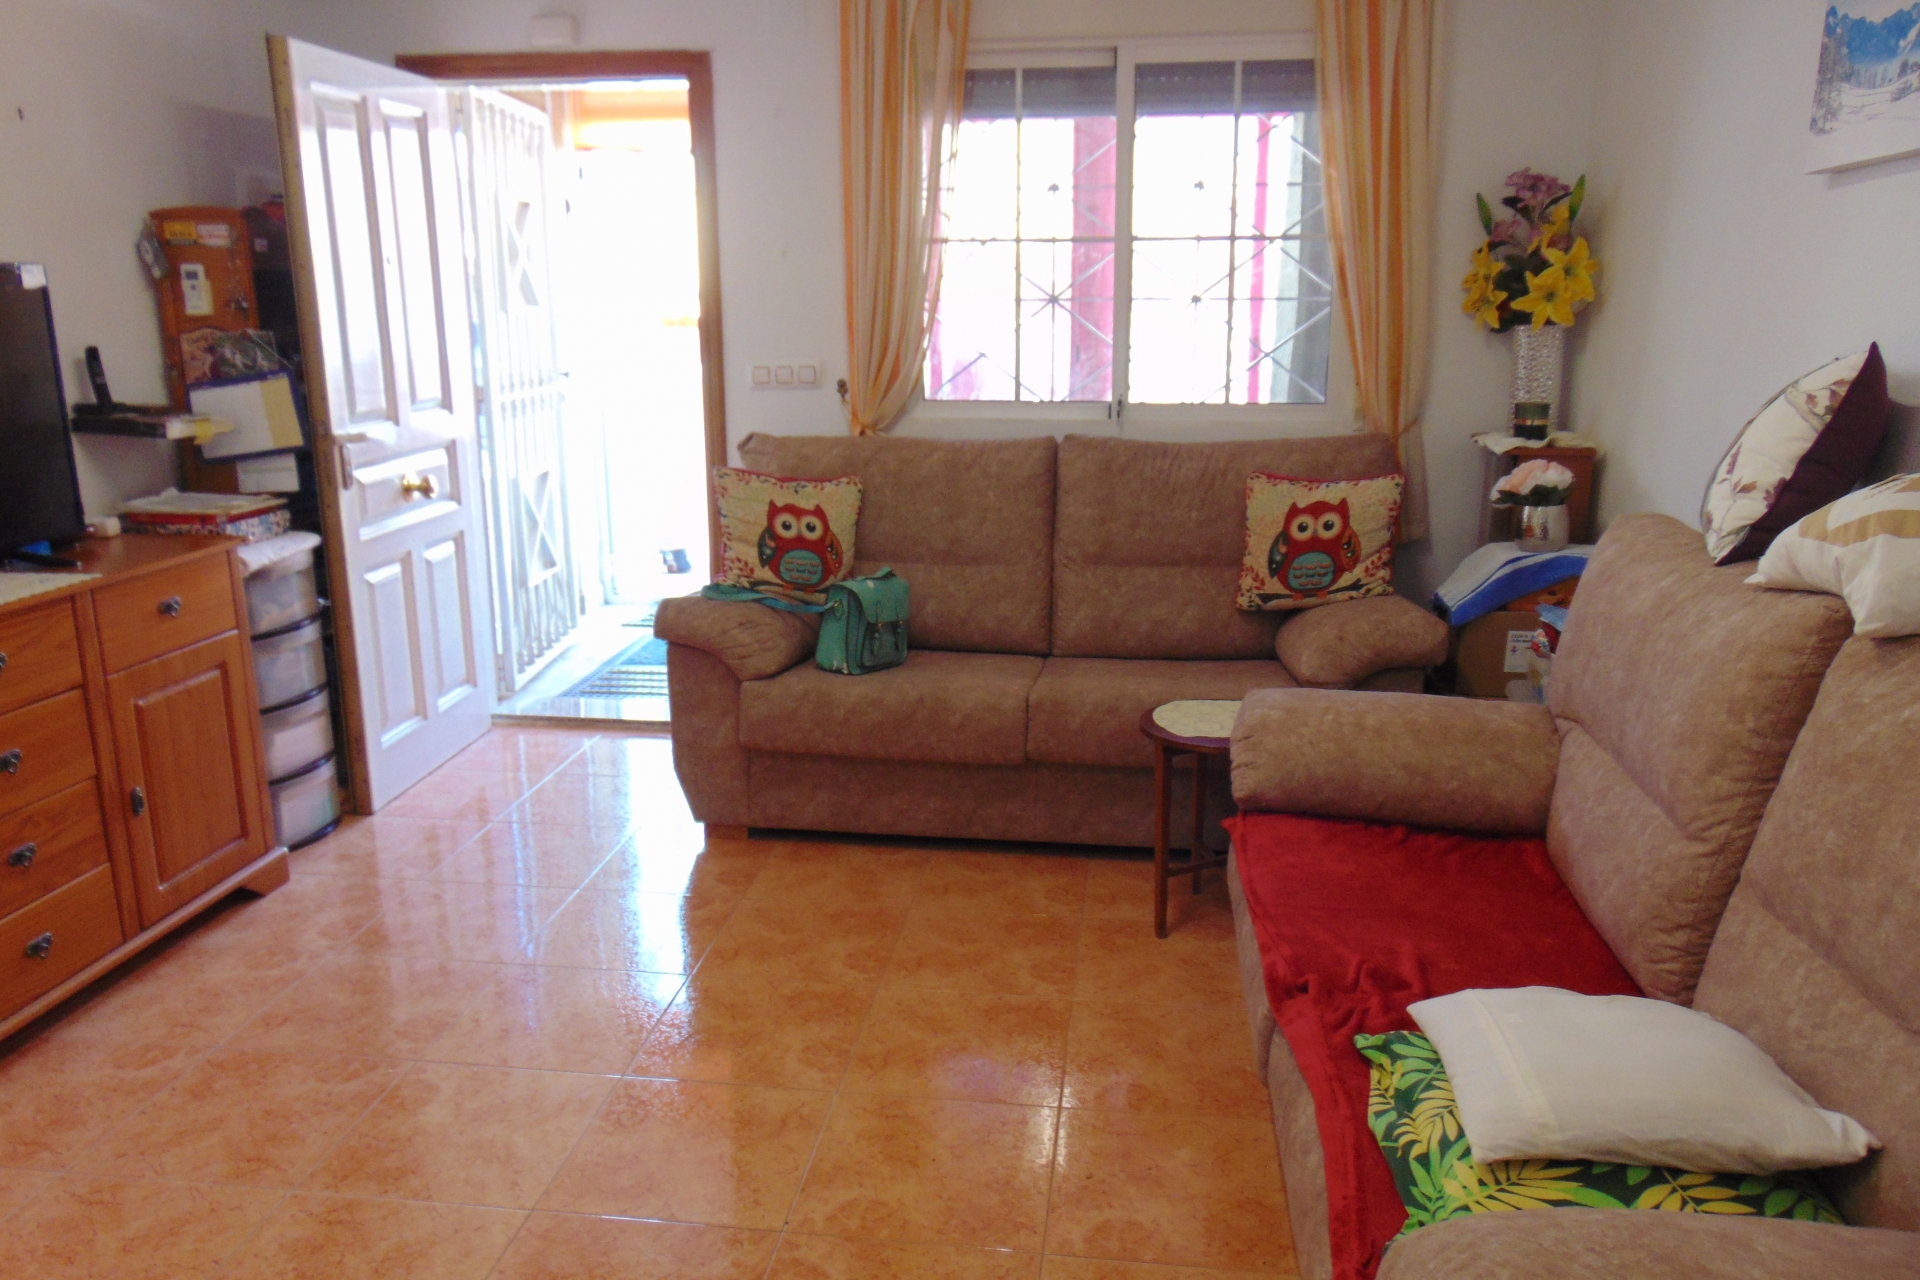 Archived - Townhouse for sale - Torrevieja - Banos de Europa